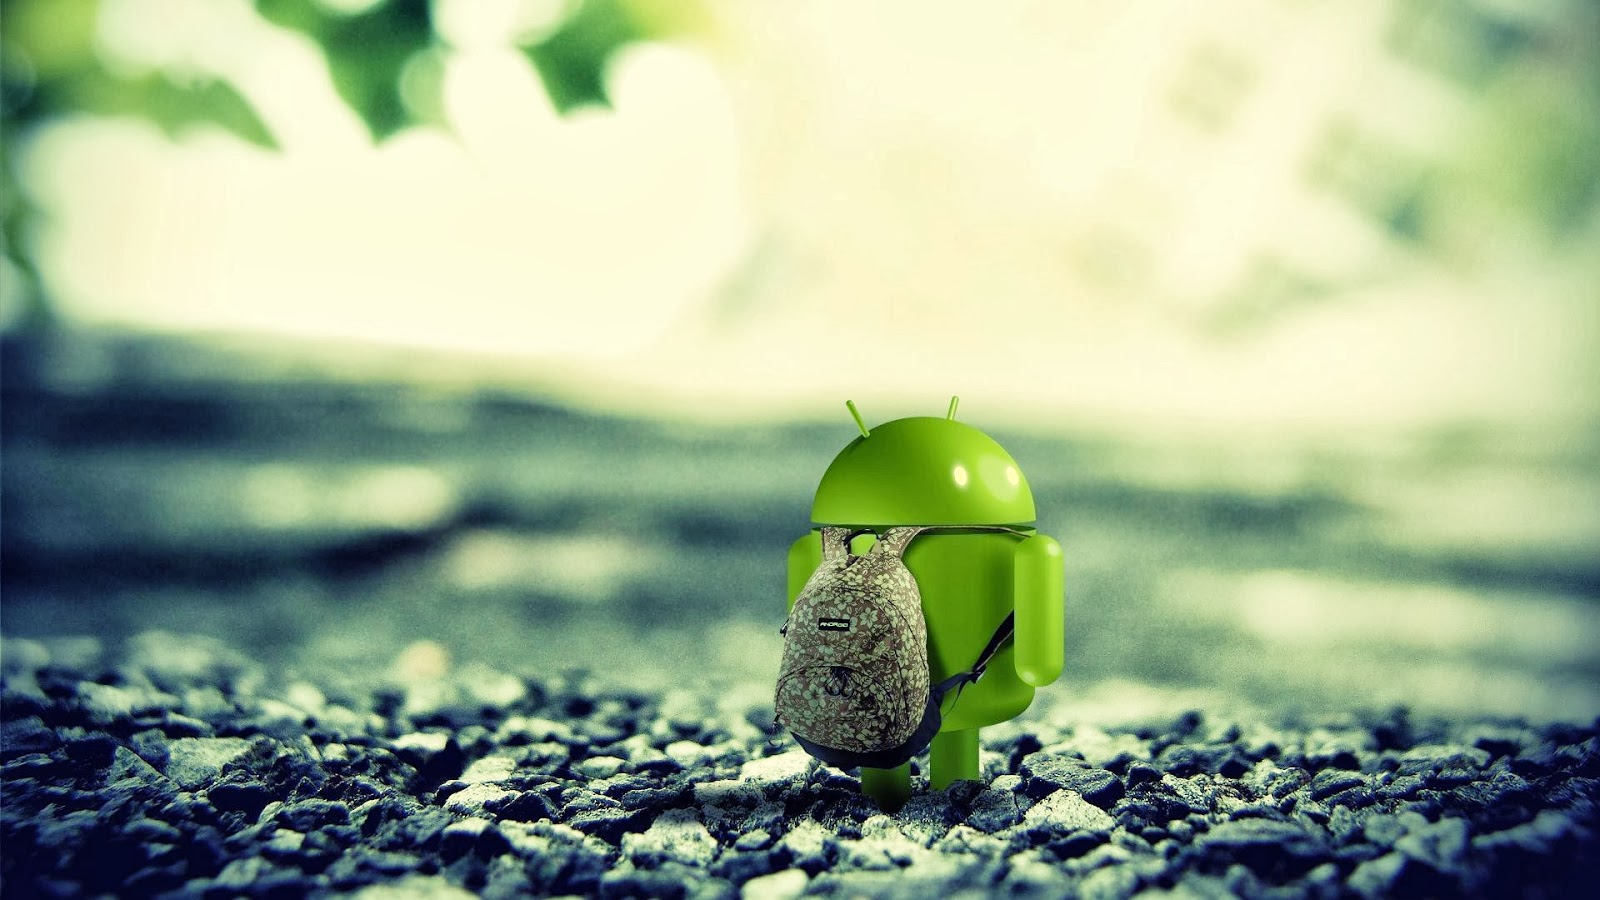 Cute Android Backpacking Brand HD Wallpaper U3